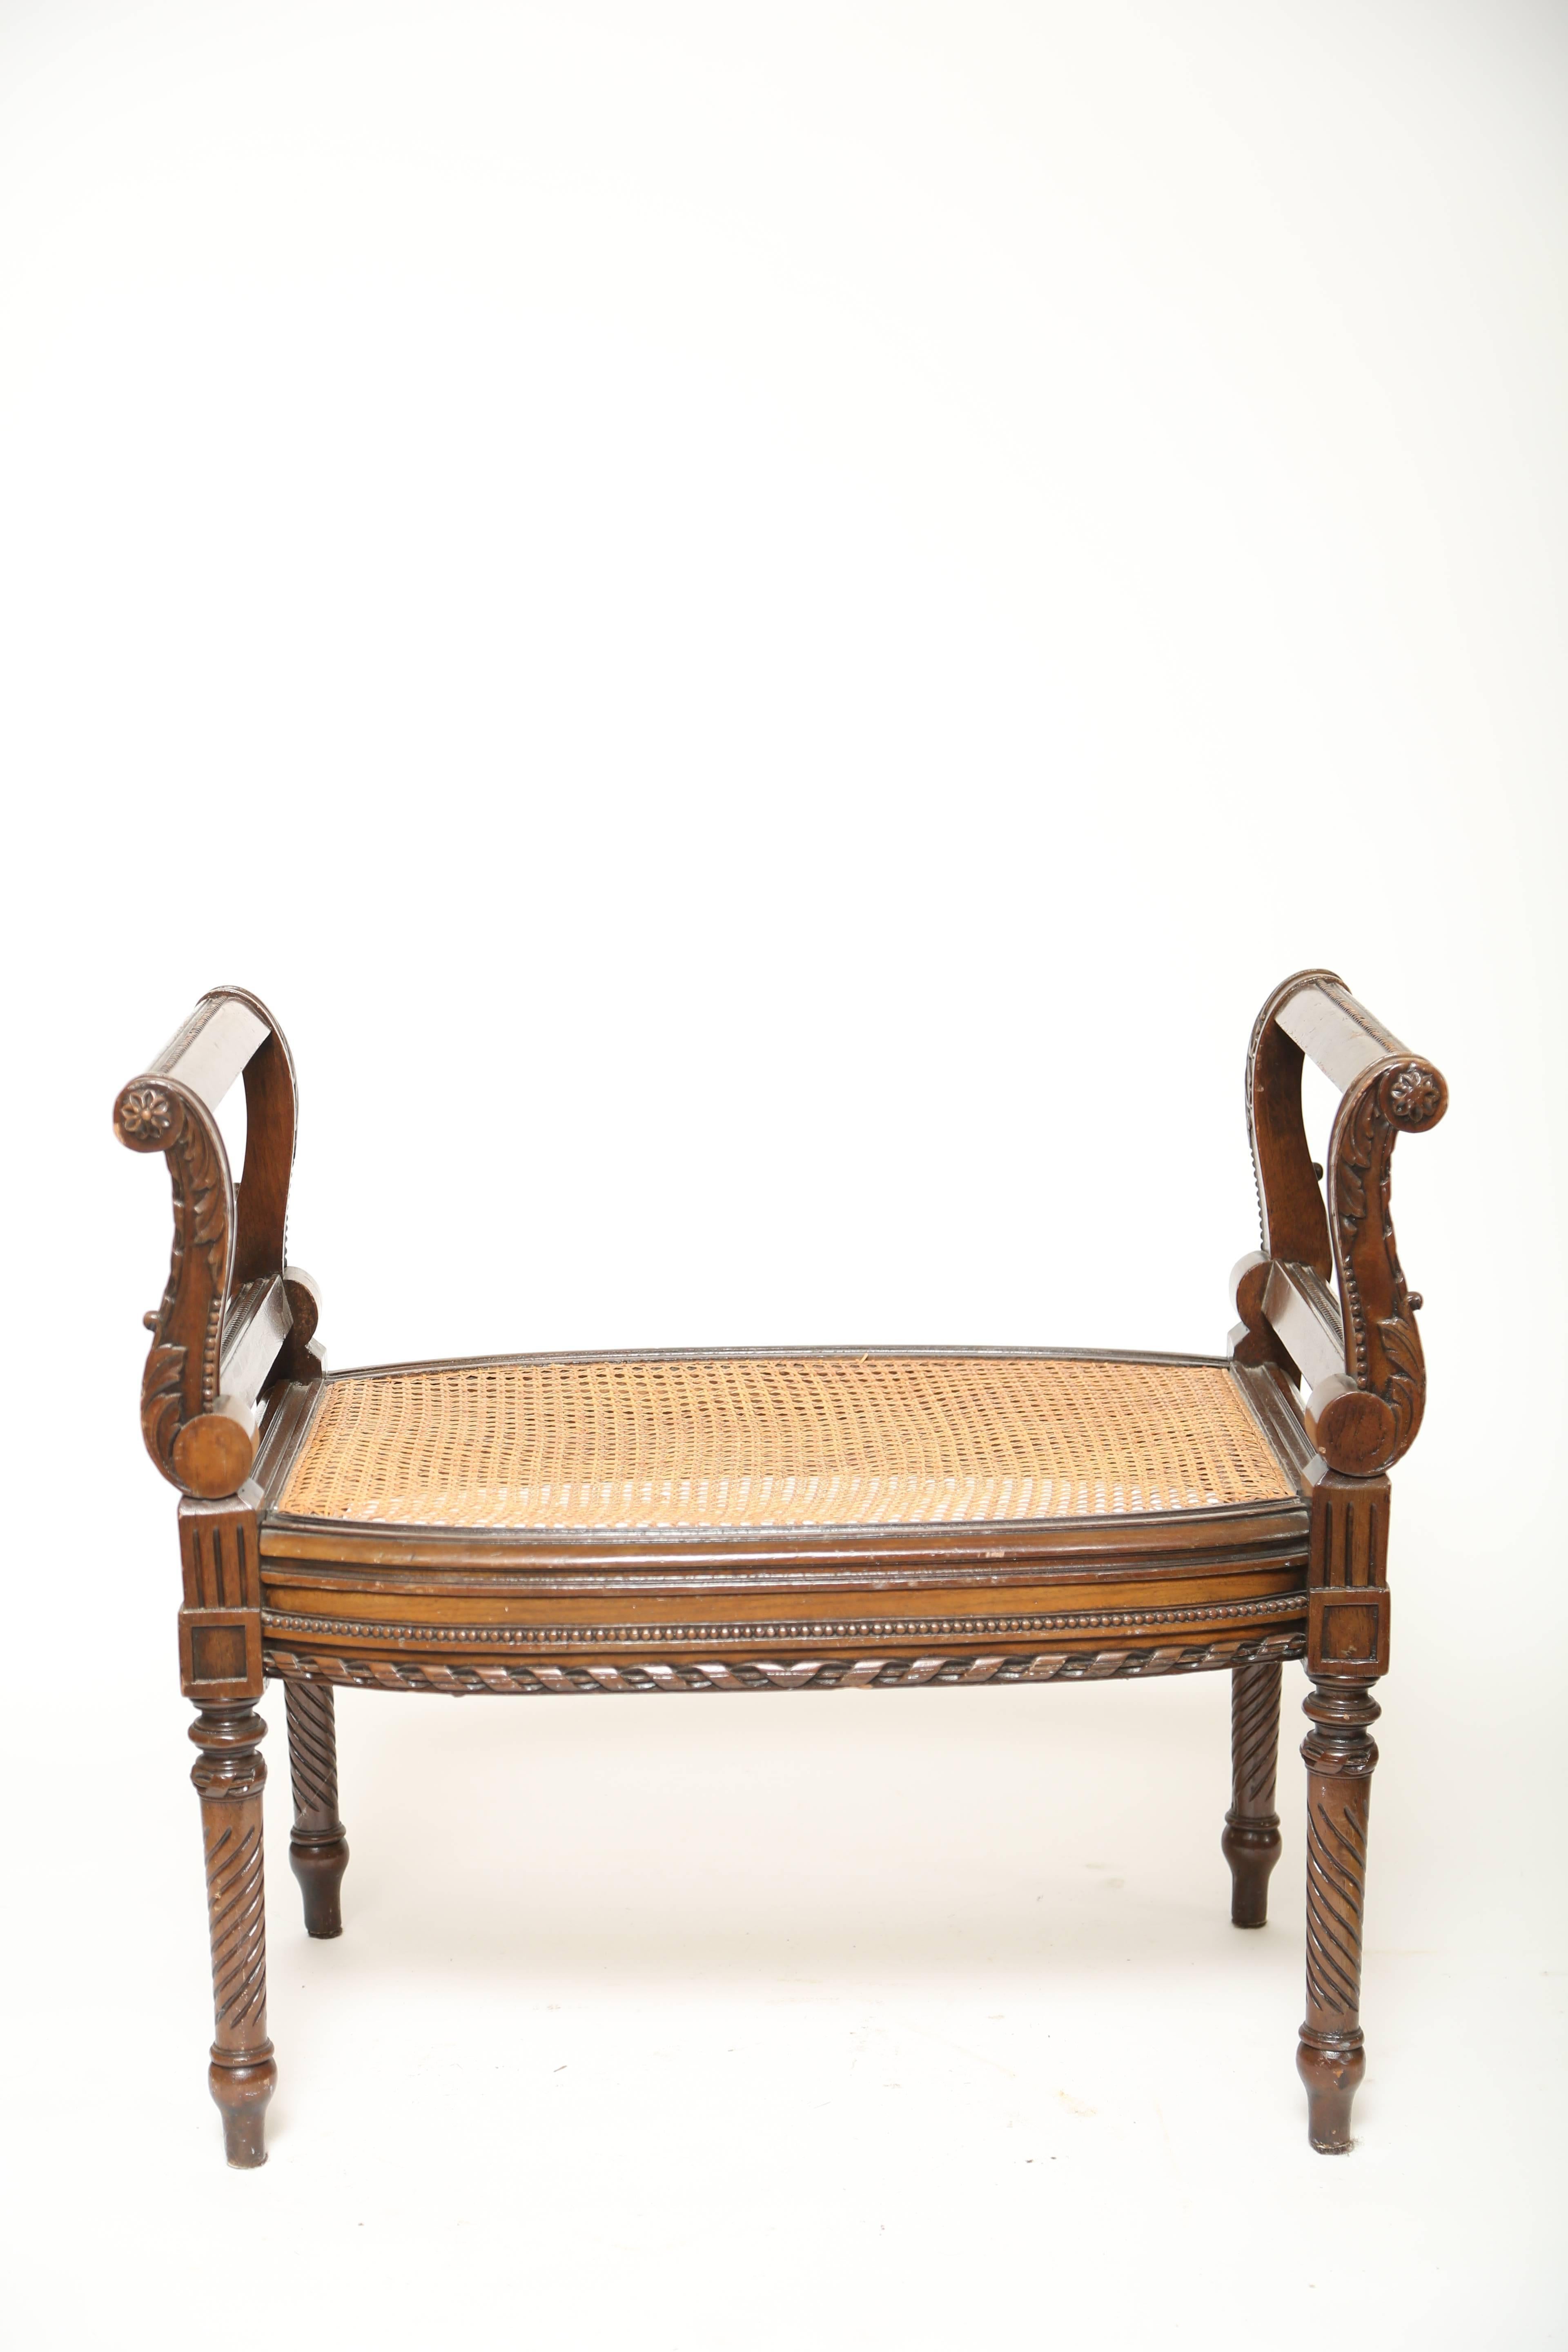 Louis XVI style carved window seat with caned seat. Carved acanthus leaves on side supports and beaded trim with turned ribbon on the apron. The legs are spiral cut.  Looking marvelous as is or with a comfy cushion.
Measures: Seat height 18.75